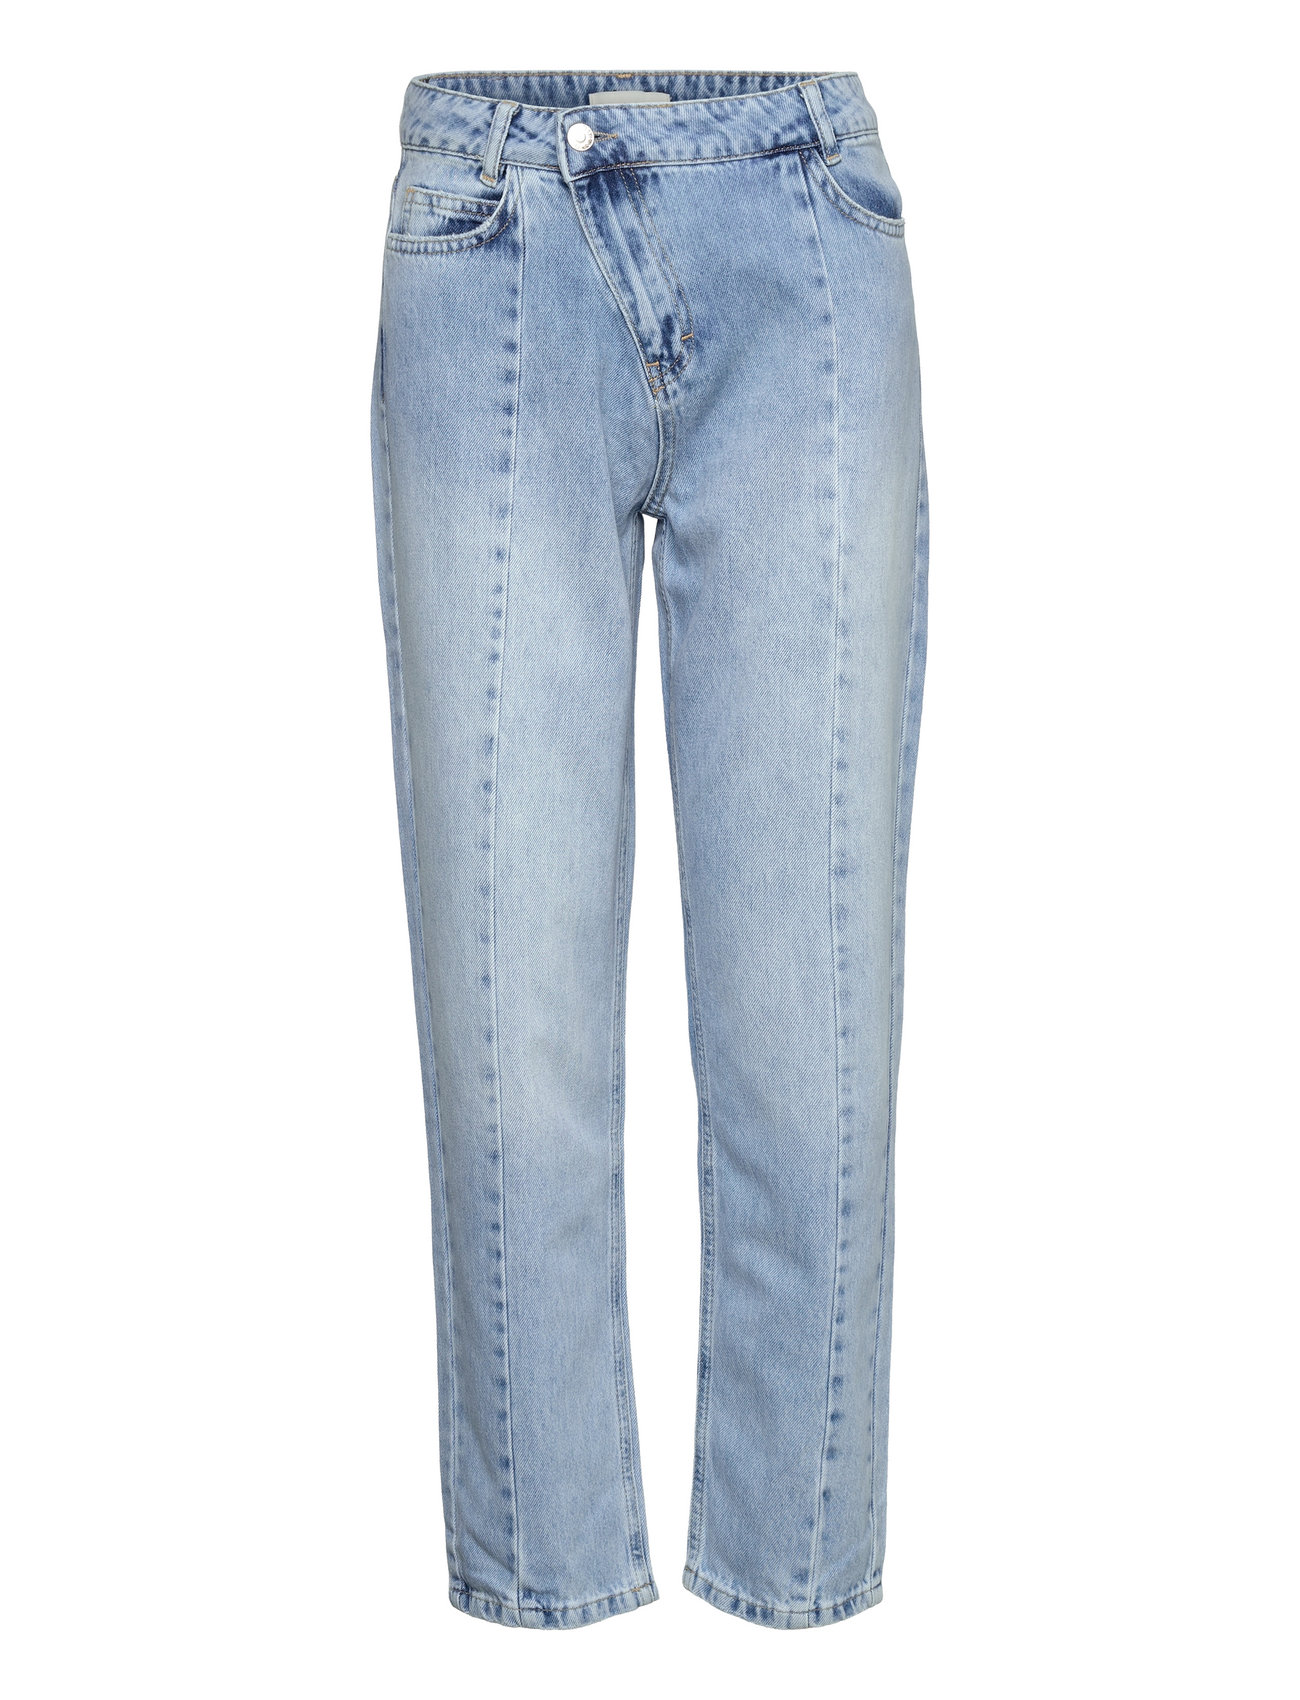 New Kenzie relaxed jeans - Light blue wash – NORR